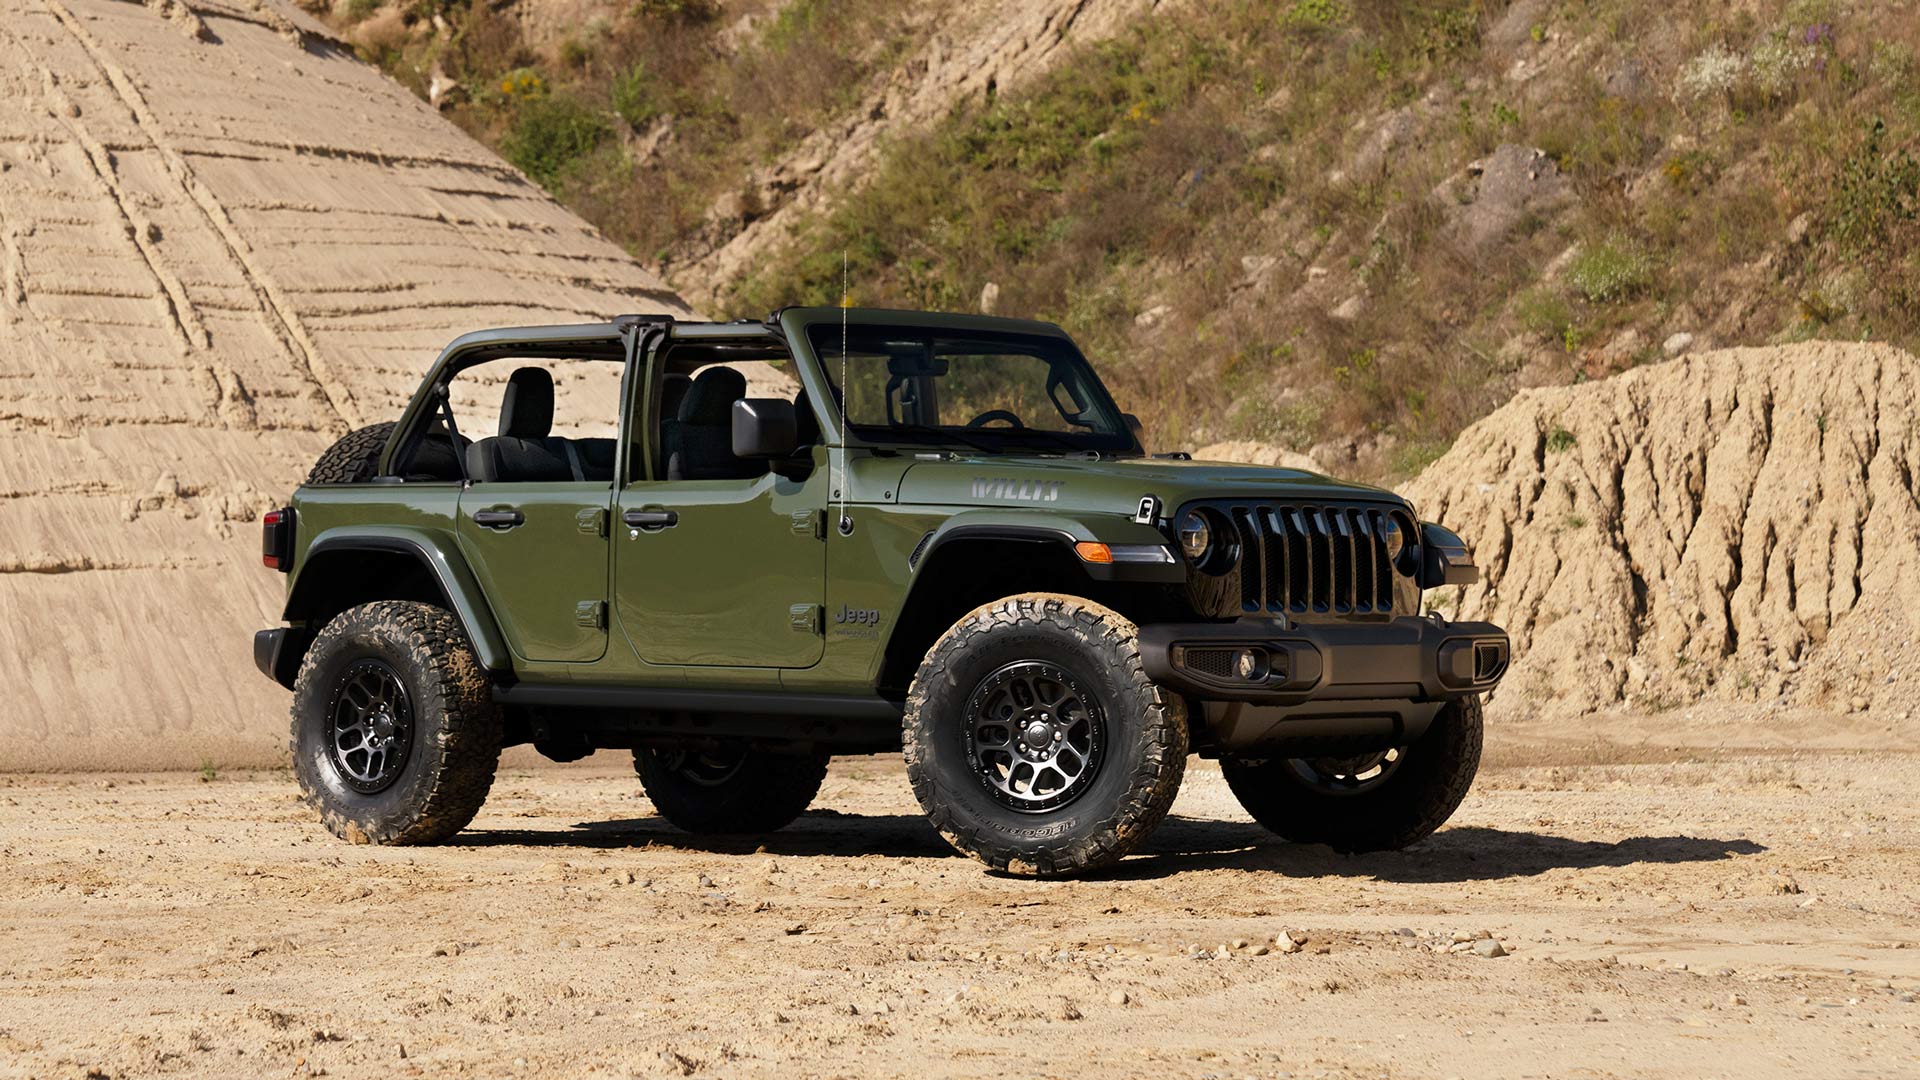 The Wrangler Willys now gets Jeep’s Xtreme Recon Package